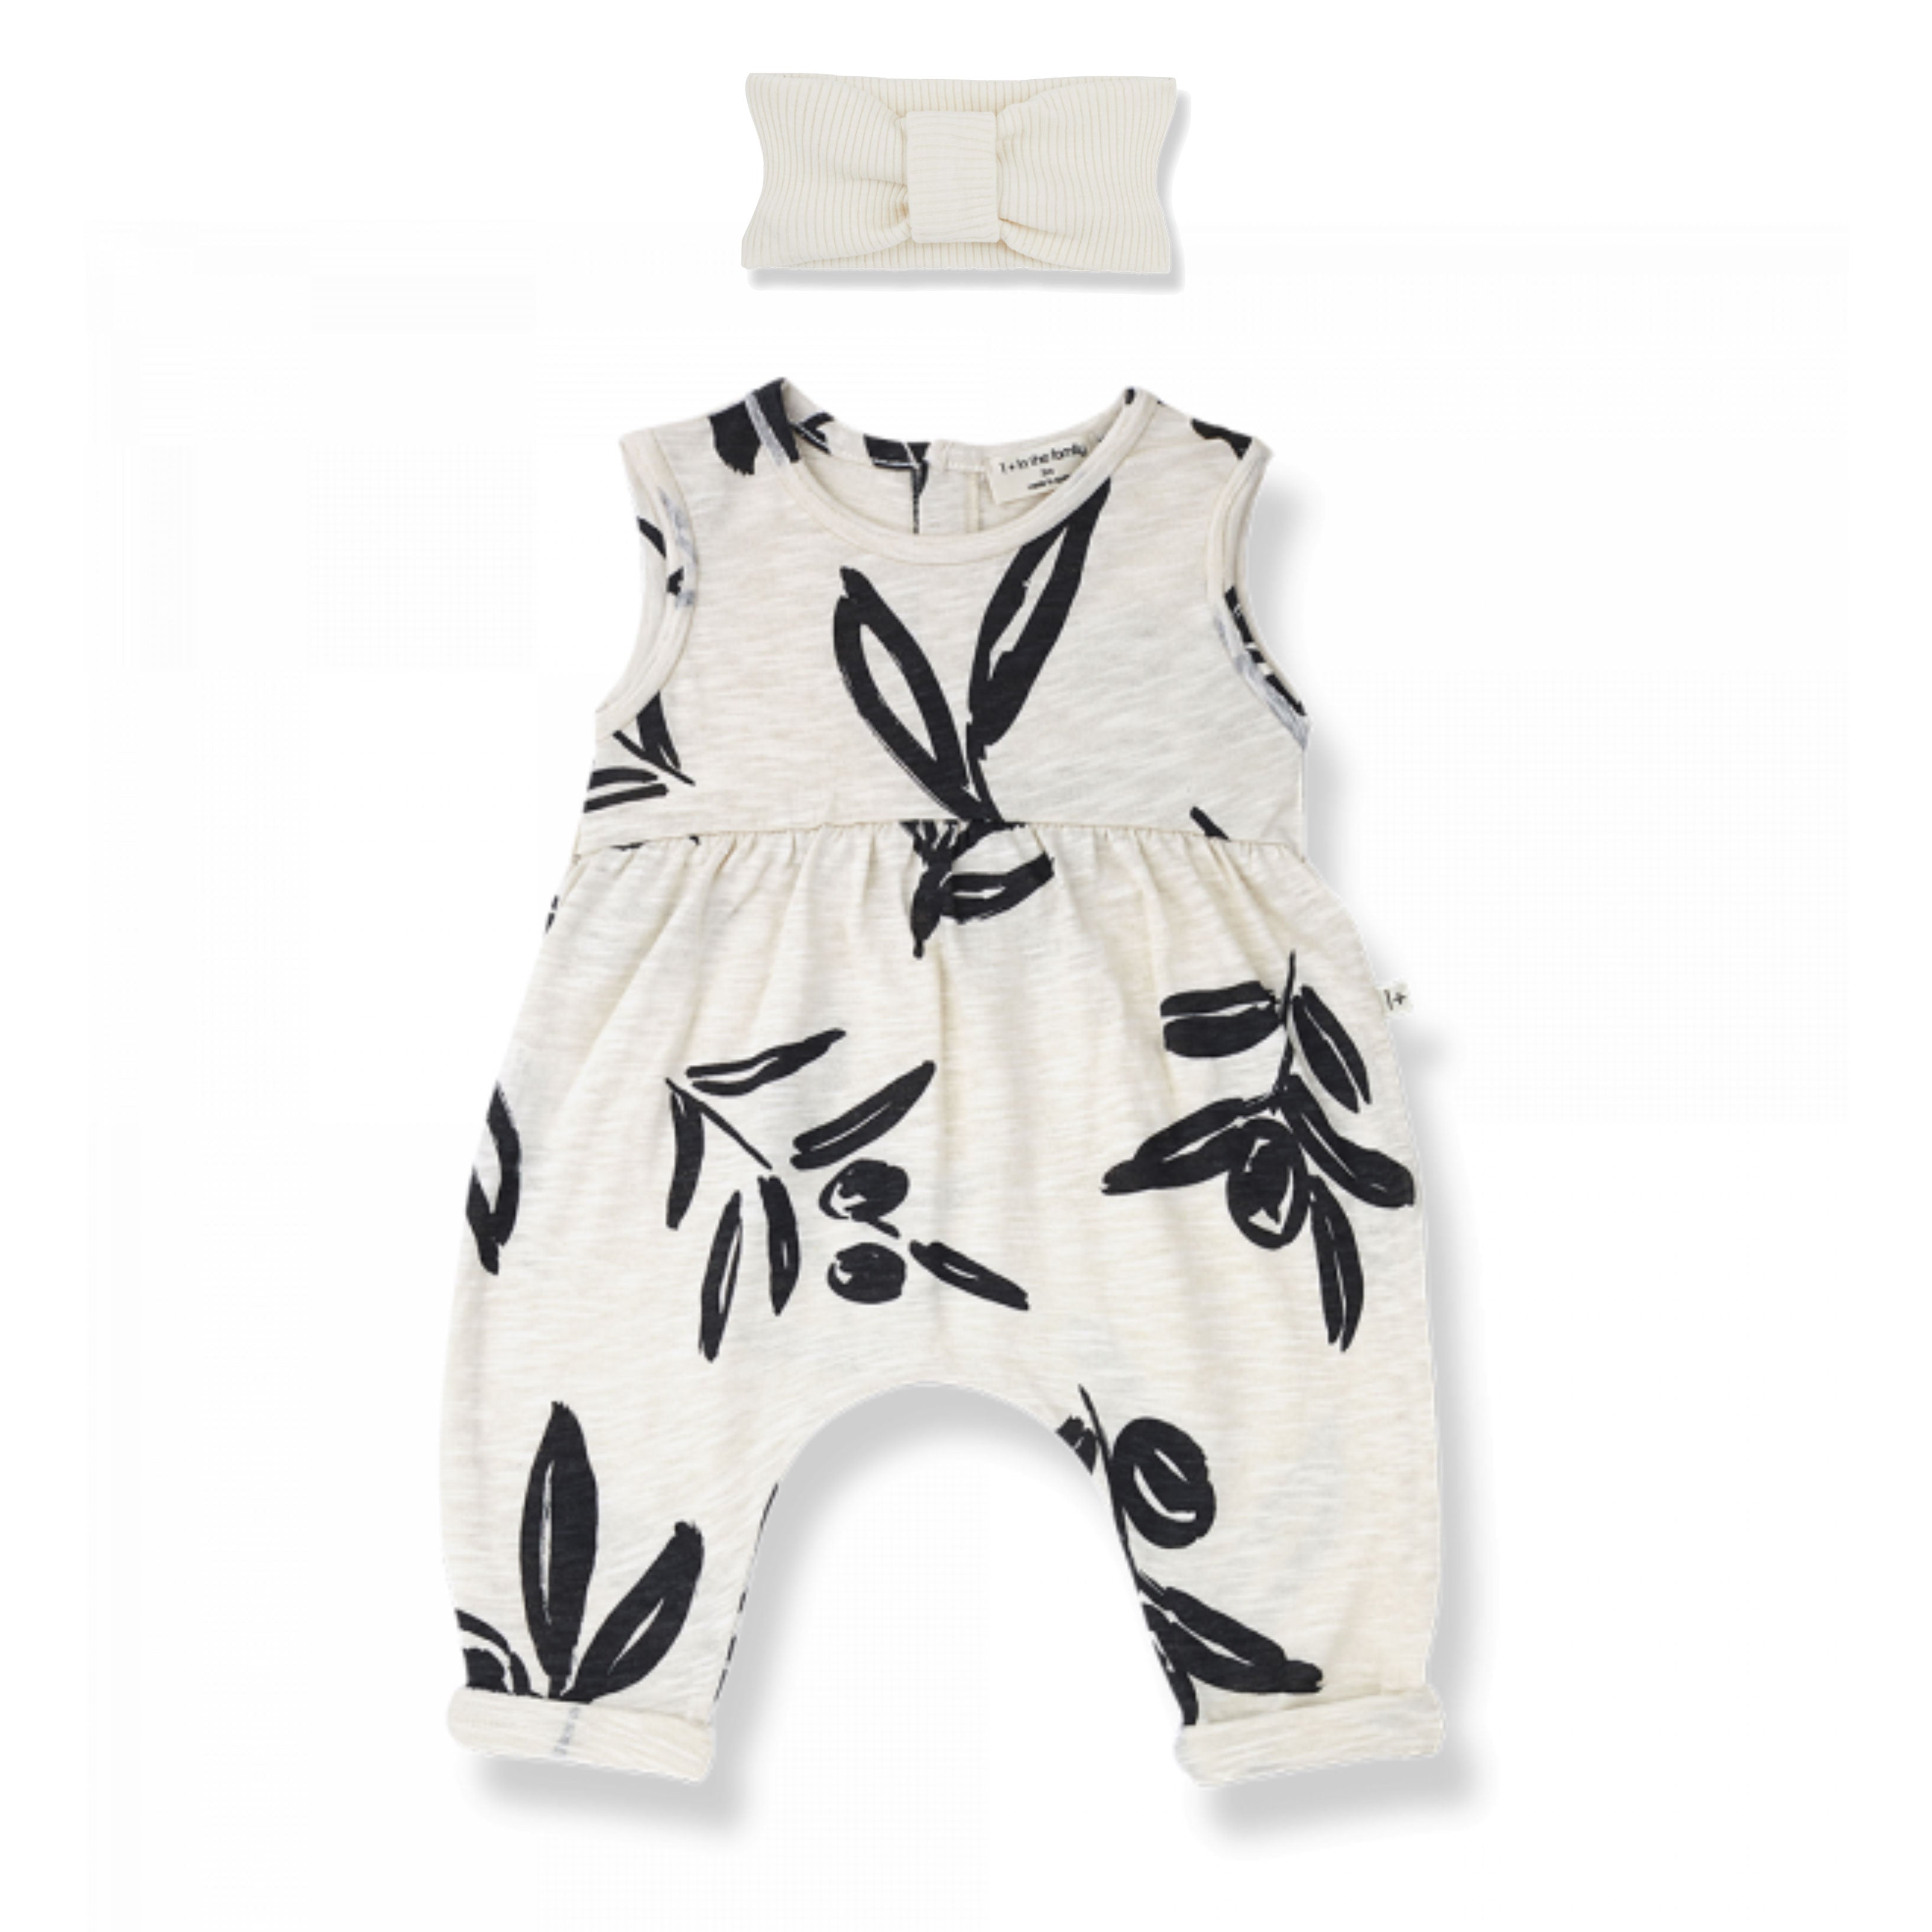 Baby Jumper in slub cotton jersey with printed flowers and headband at Bonjour Baby Baskets